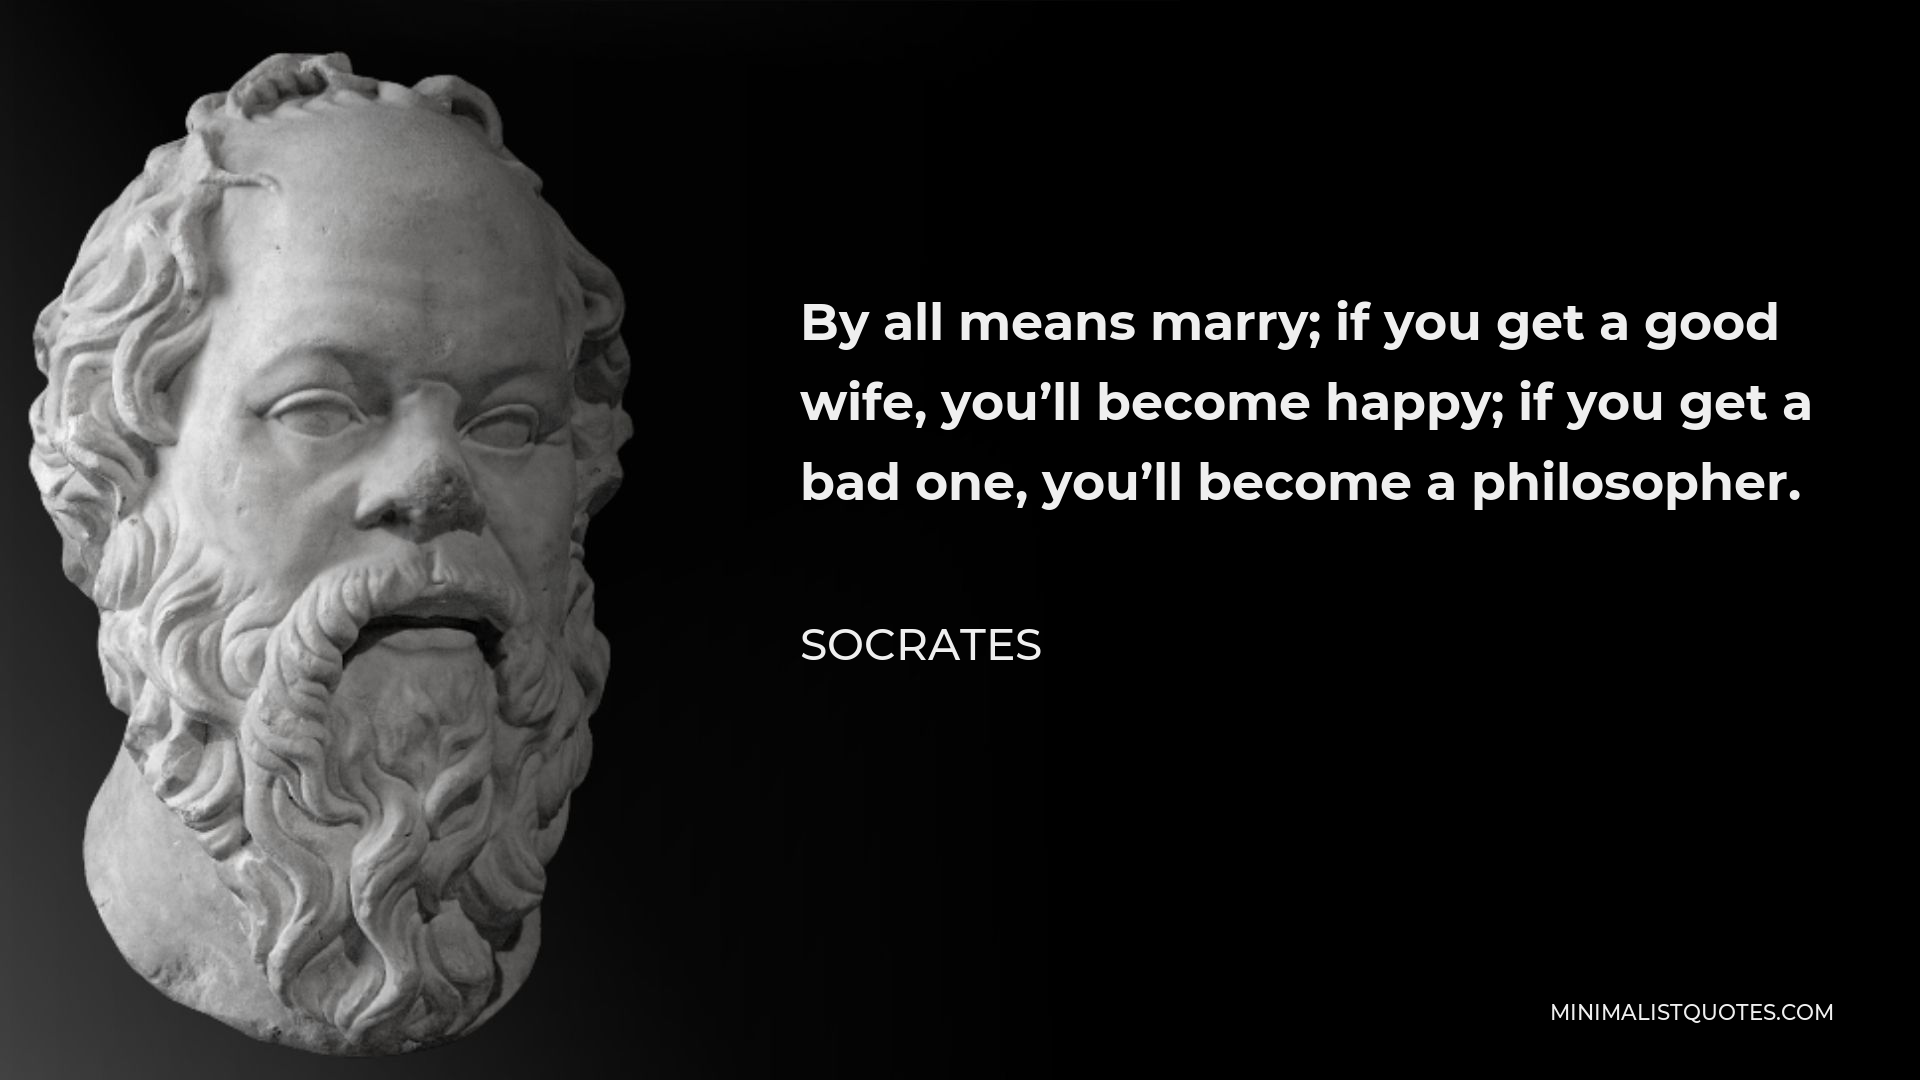 Socrates Quote - By all means marry; if you get a good wife, you’ll become happy; if you get a bad one, you’ll become a philosopher.